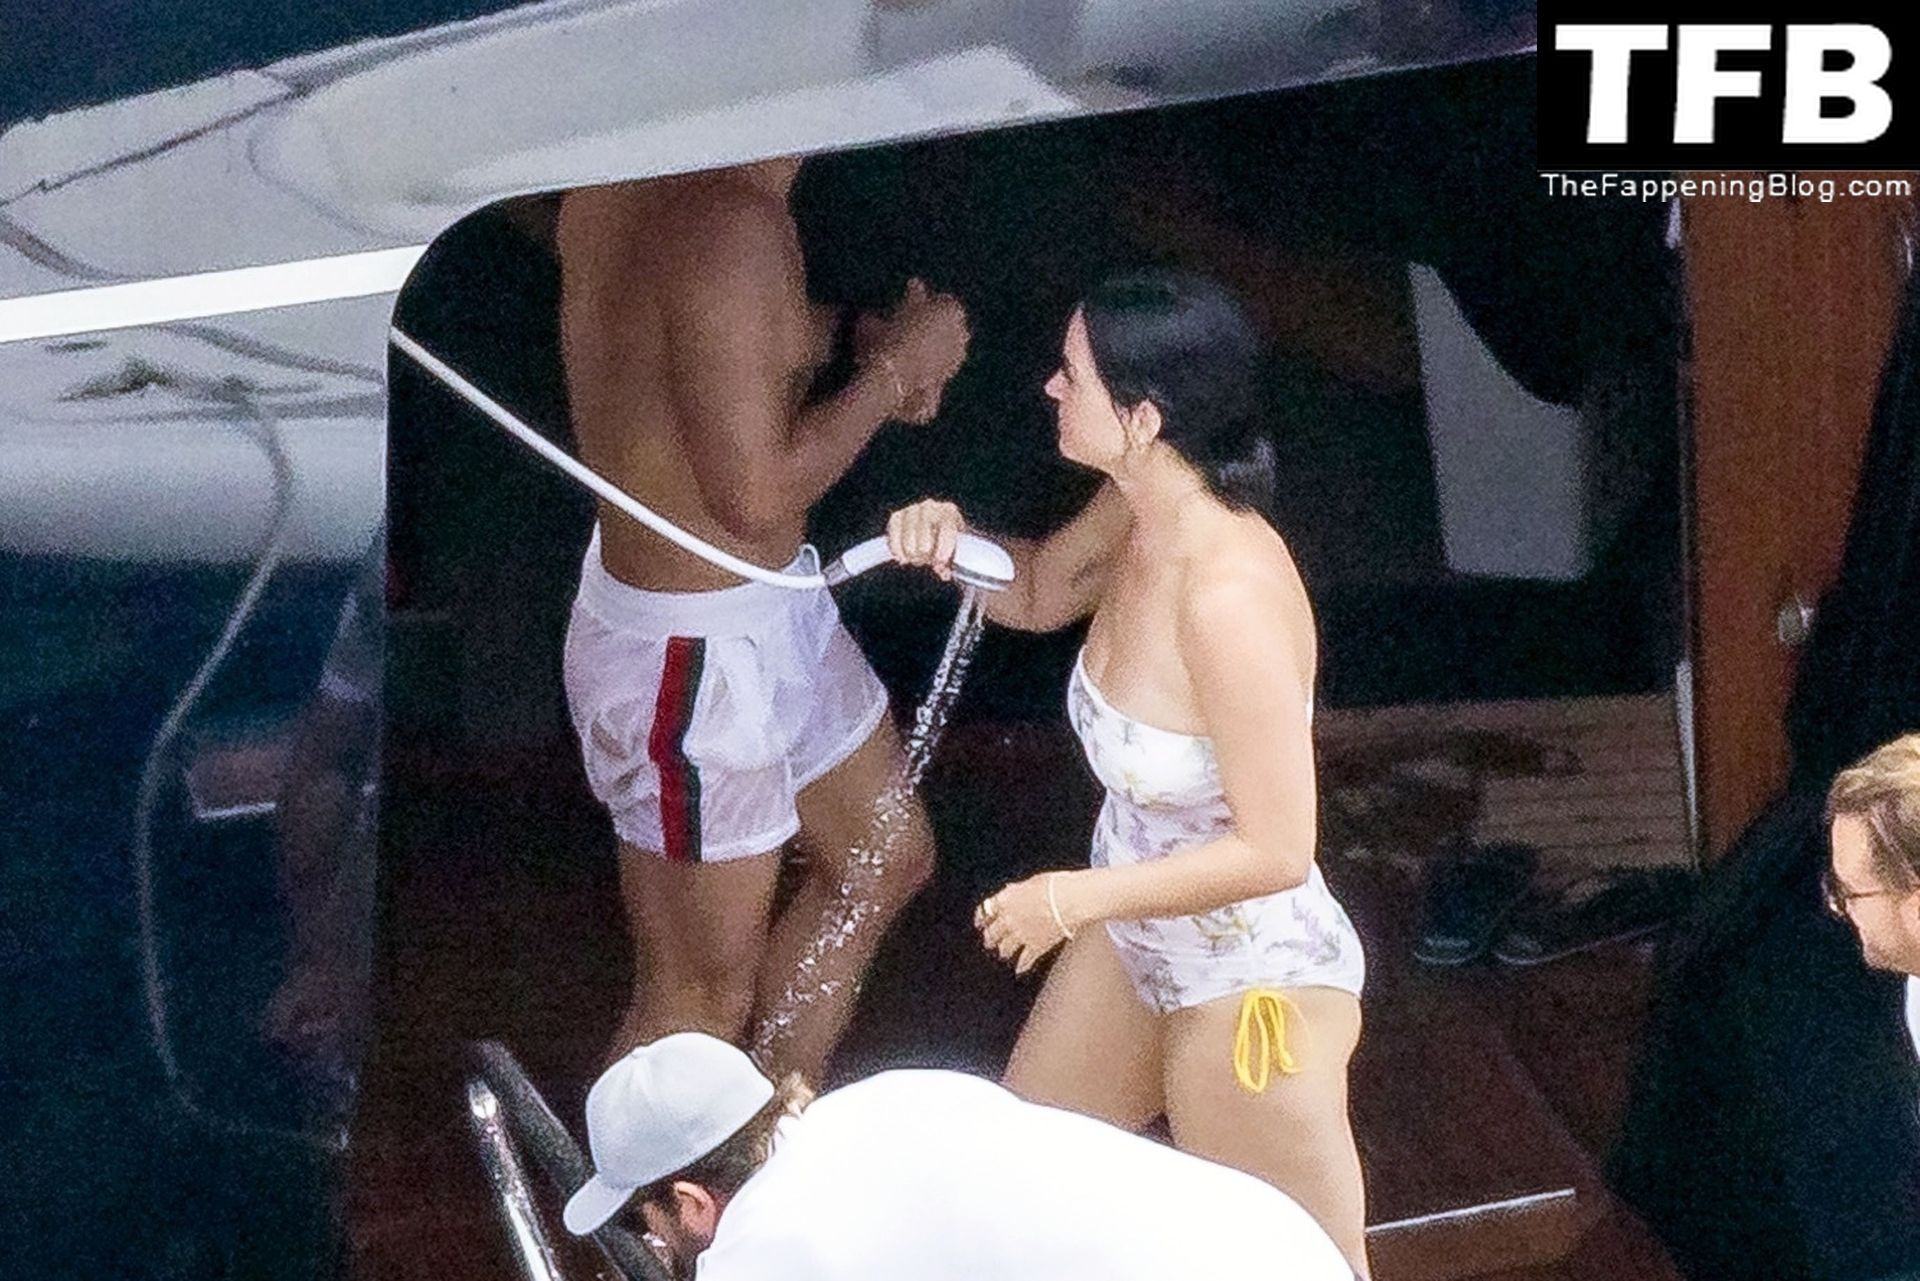 Katy Perry Sexy The Fappening Blog 94 - Katy Perry Rocks a Strapless Swimsuit While Enjoying a Beach Day with Orlando Bloom in Positano (105 Photos)